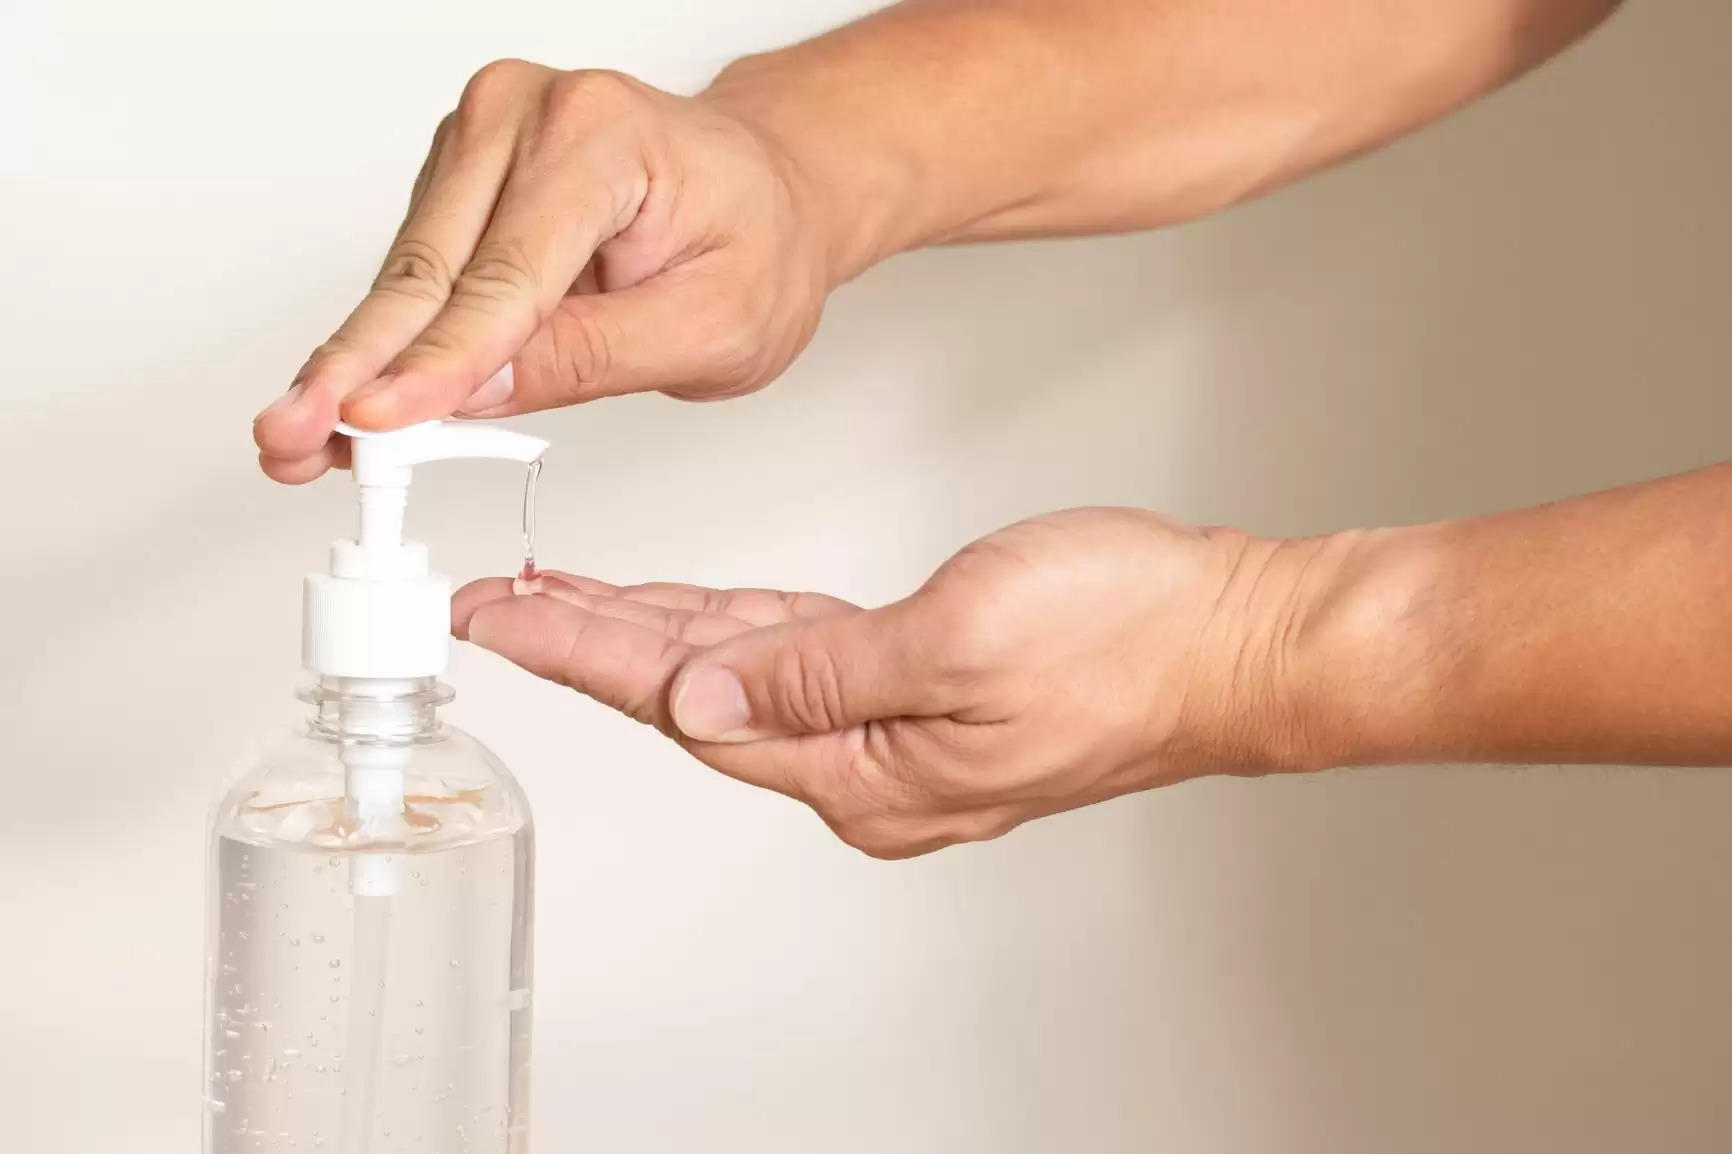 Some questions and solutions about sanitizer World Health Organization